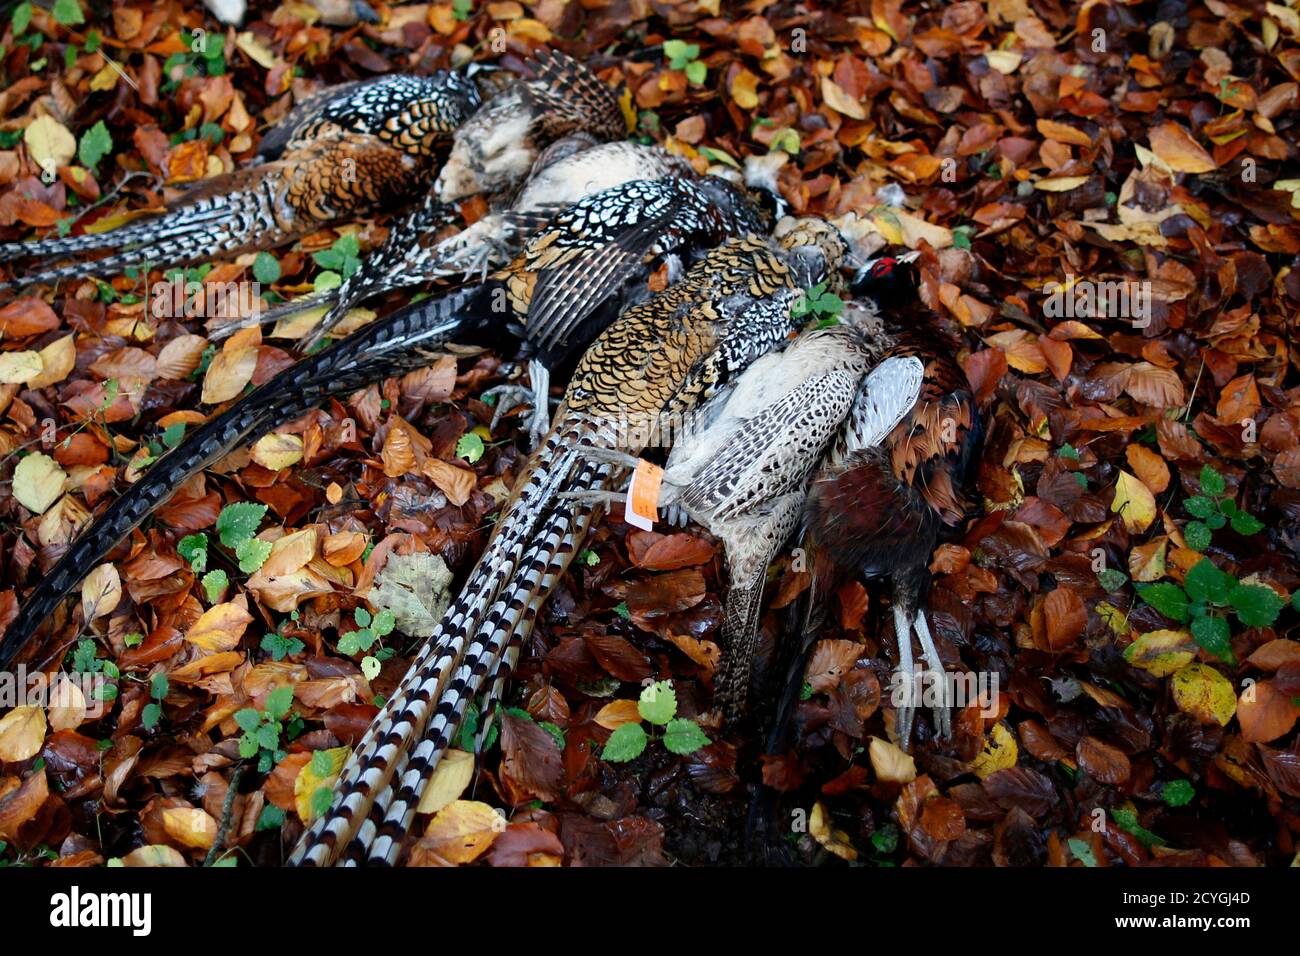 Killed pheasants are presented on the ground during the hunt in a forest at  Bayenghem-les-Seninghem, near Saint-Omer, northern France, November 15,  2013. Game hunting is one of the most popular pastimes in